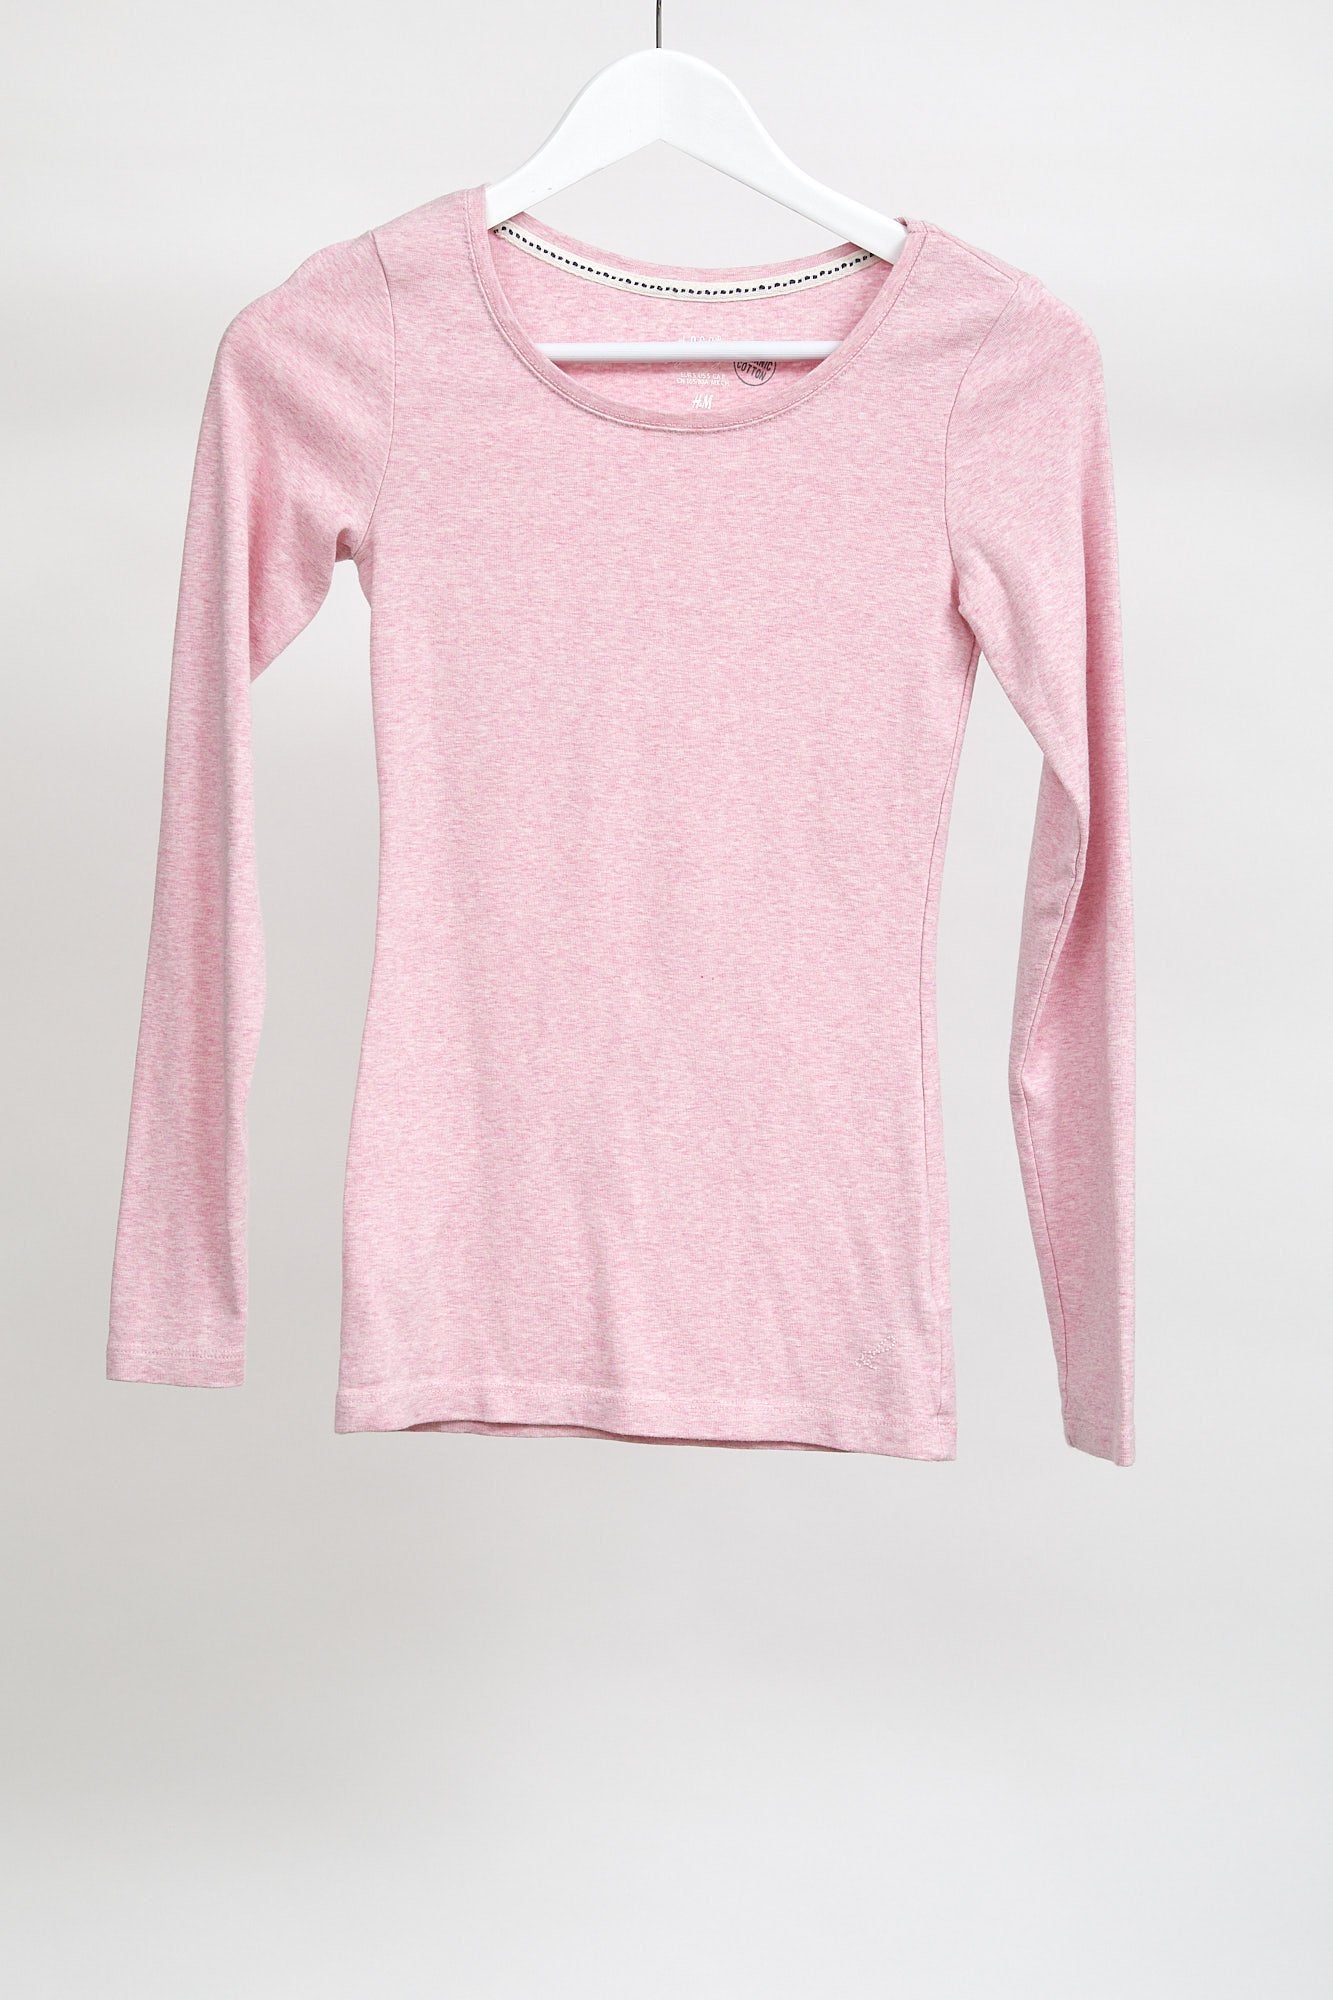 Womens Pink Long-Sleeve T-Shirt: Size Small